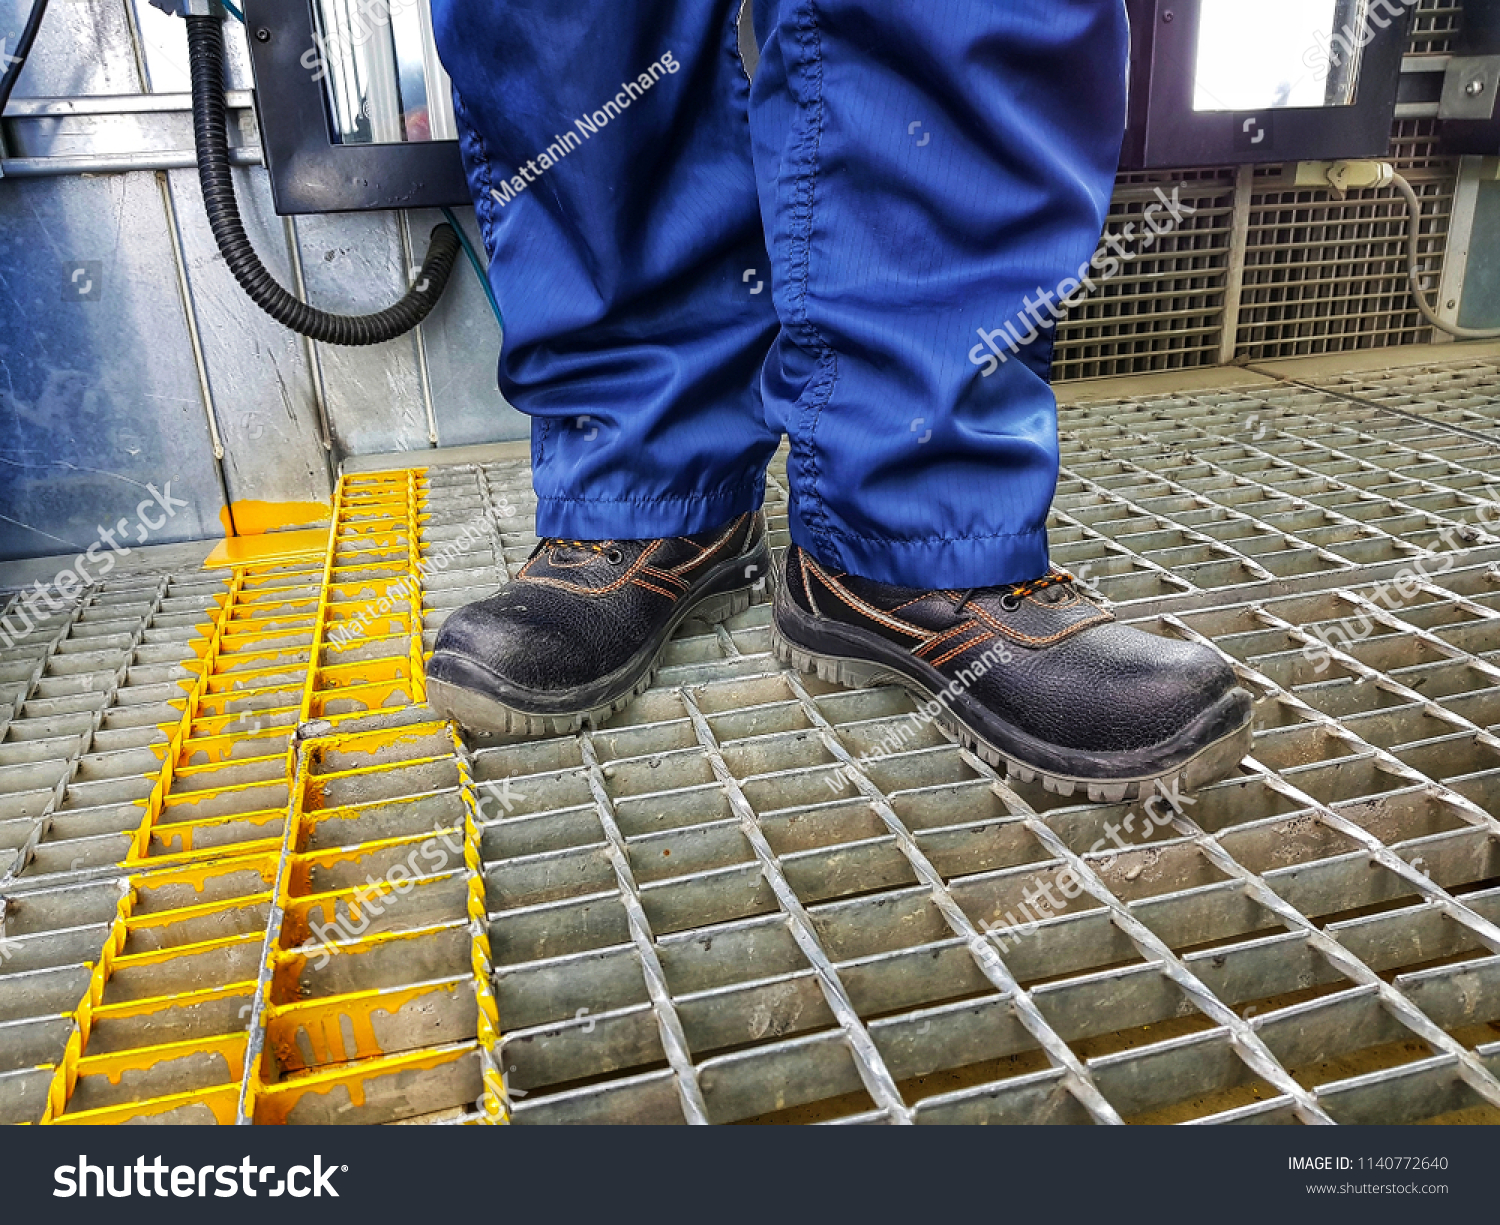 use of safety shoes